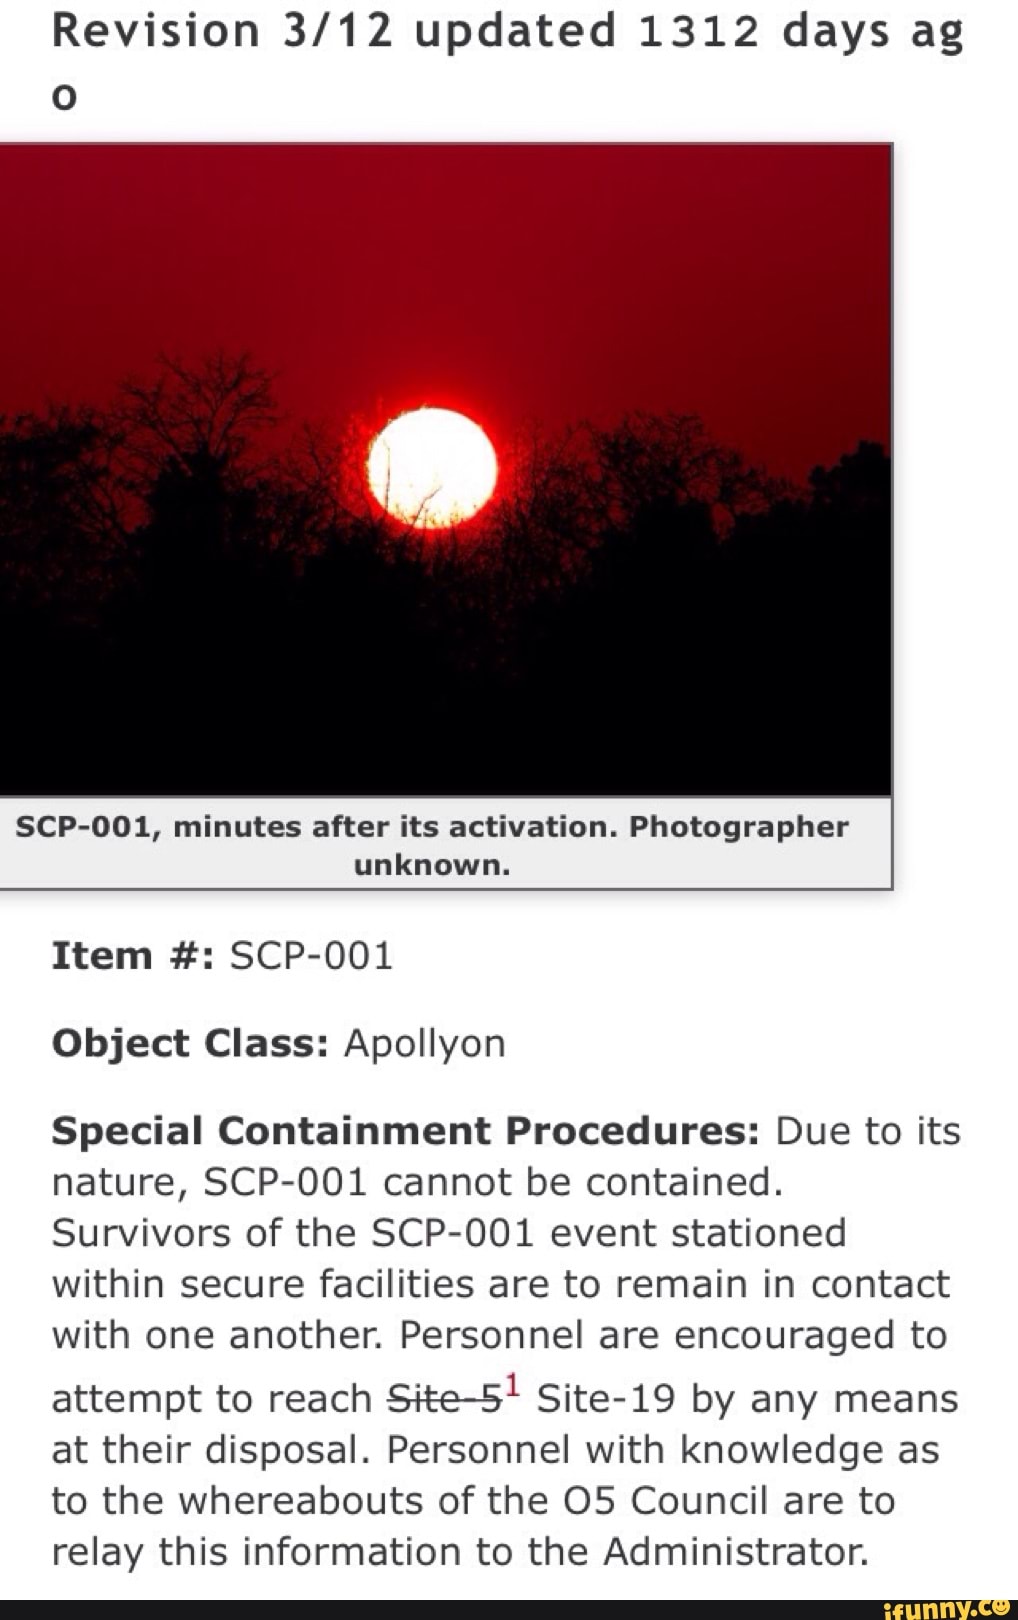 Revision 3 12 Updated 1312 Days Ag O Scp 001 Minutes After Its Activation Photographer Unknown Item Scp Ool Object Class Apollyon Special Containment Procedures Due To Its Nature Scp Ool Cannot Be Contained Survivors